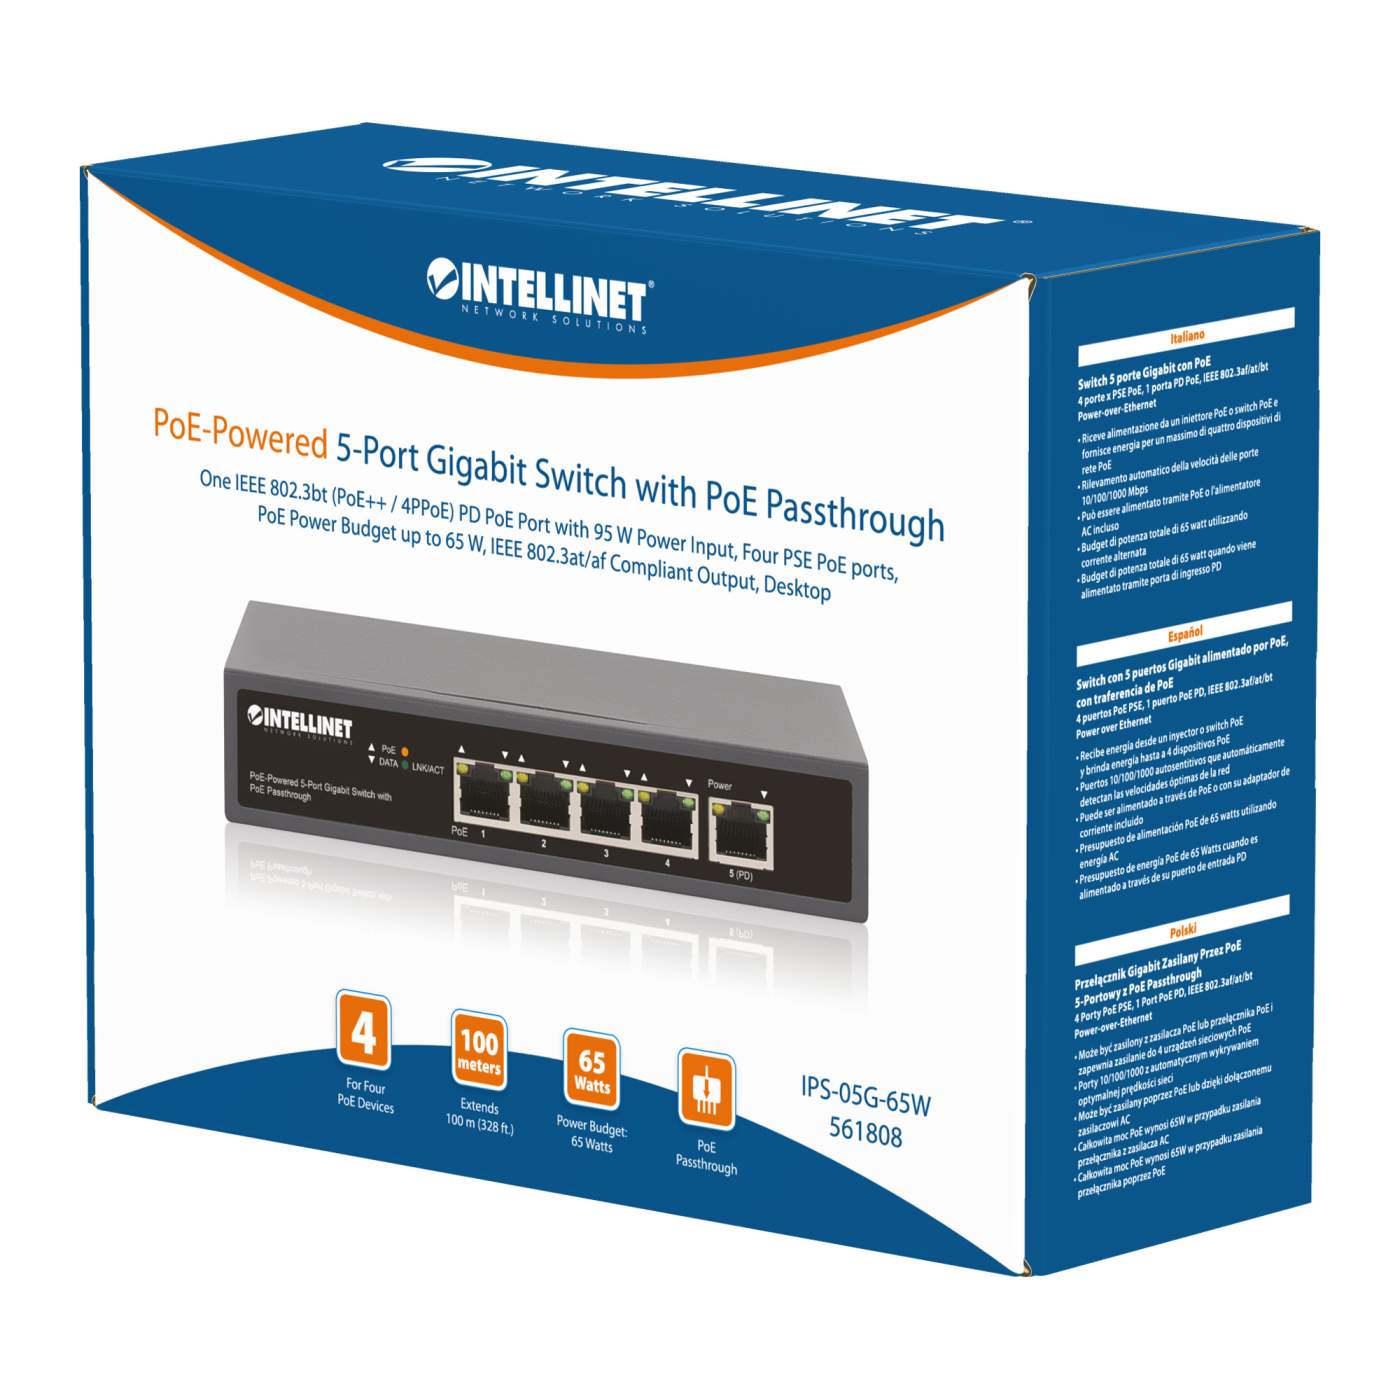 Intellinet 561808 5-Port PoE-Powered Gigabit Switch with PoE Passthrough